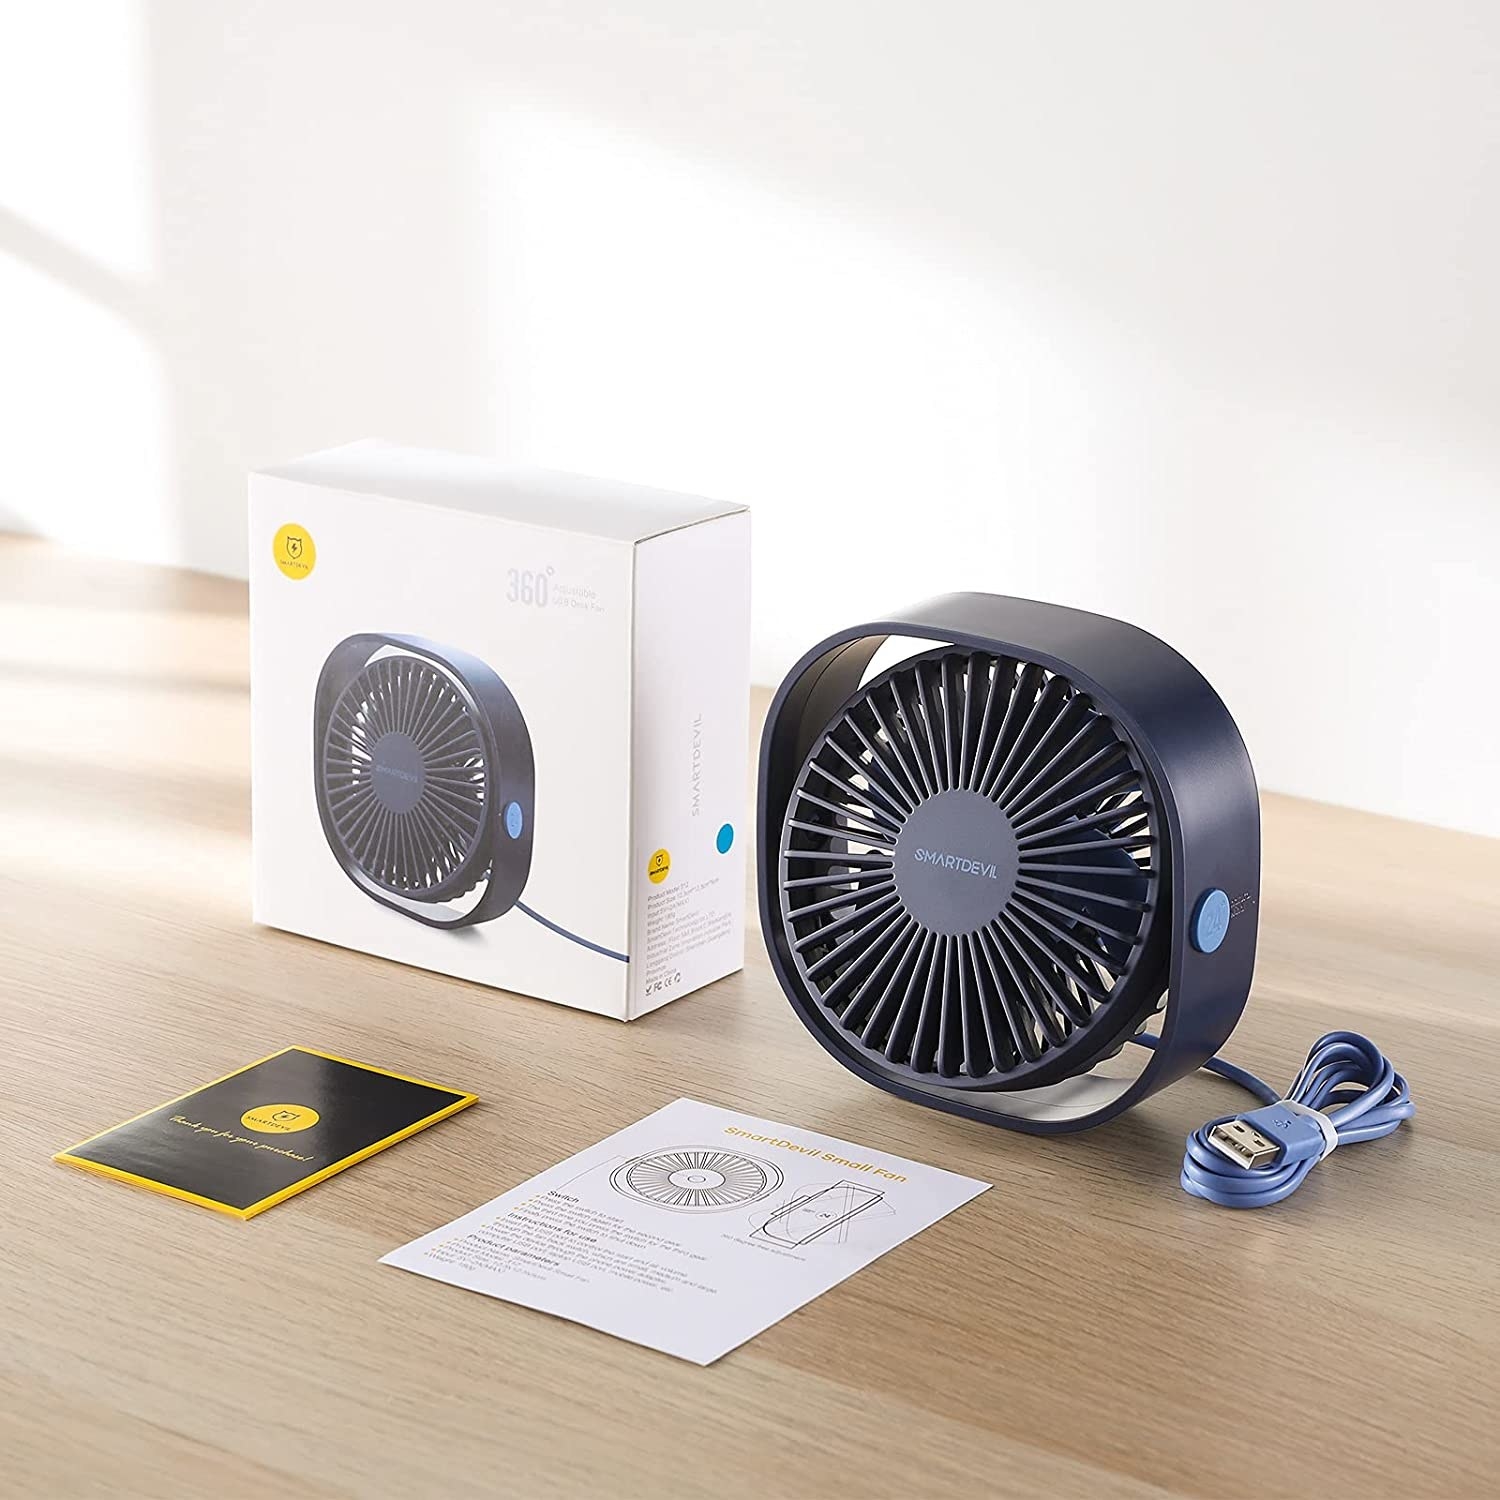 A desk fan next to its packaging and the manual for usage